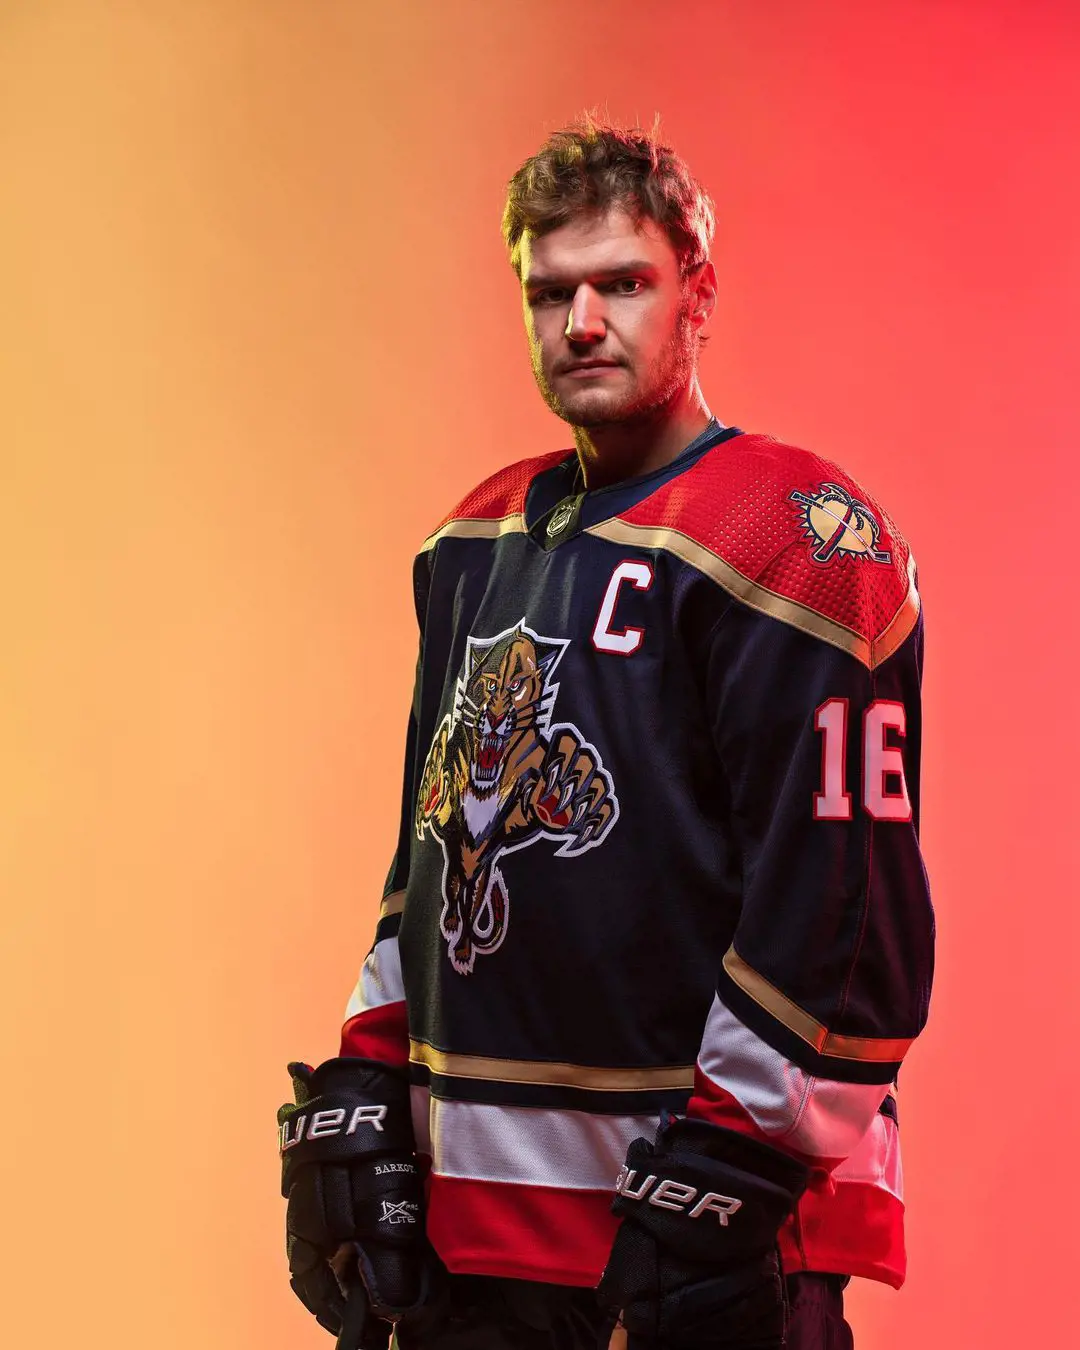 Aleksander Serves As The Center And The Captain Of The NHL Franchise